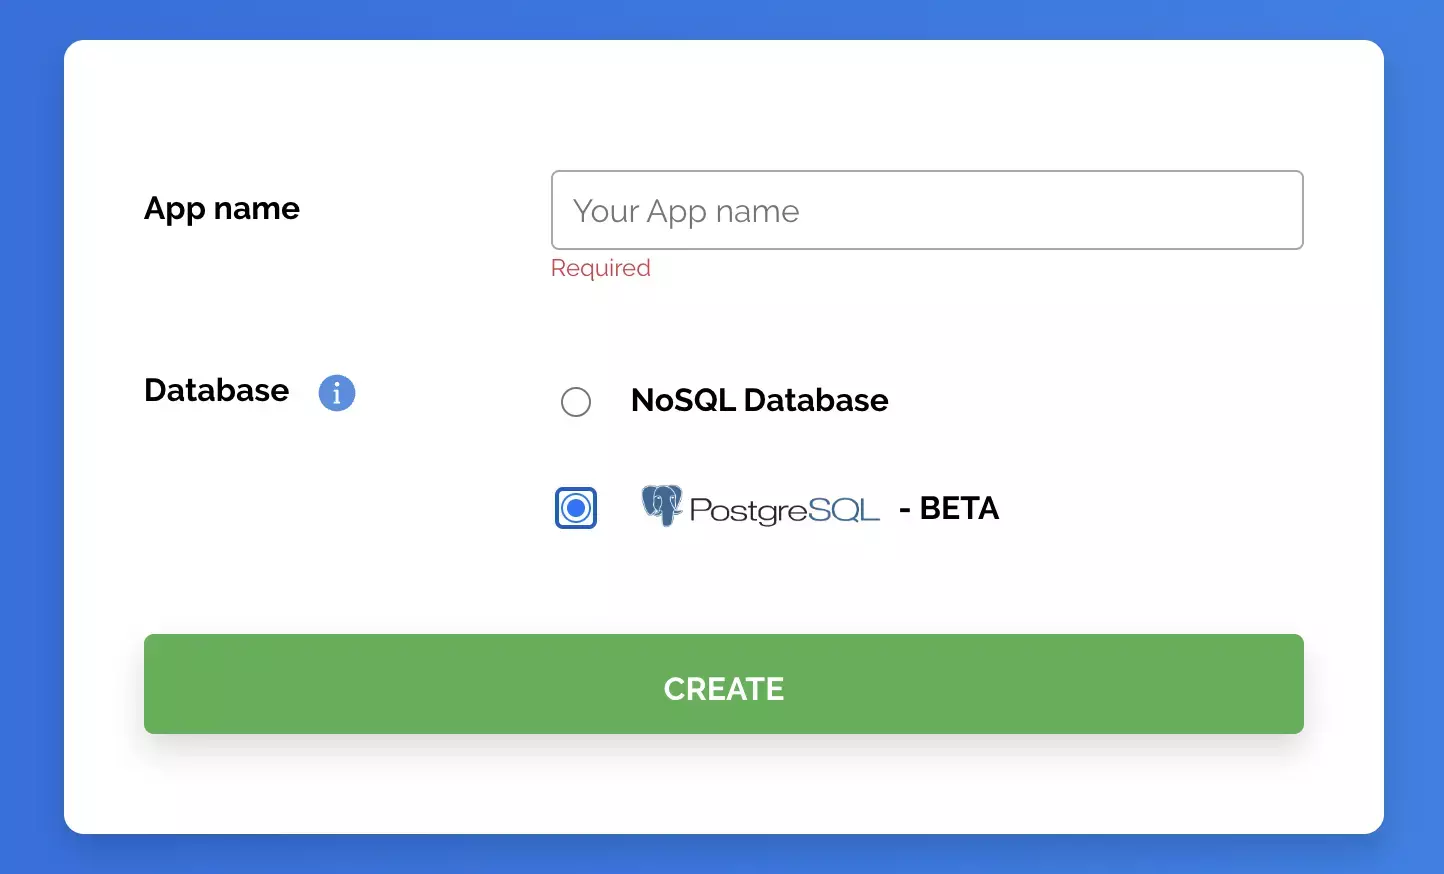 Create new app modal with app name and SQL database option